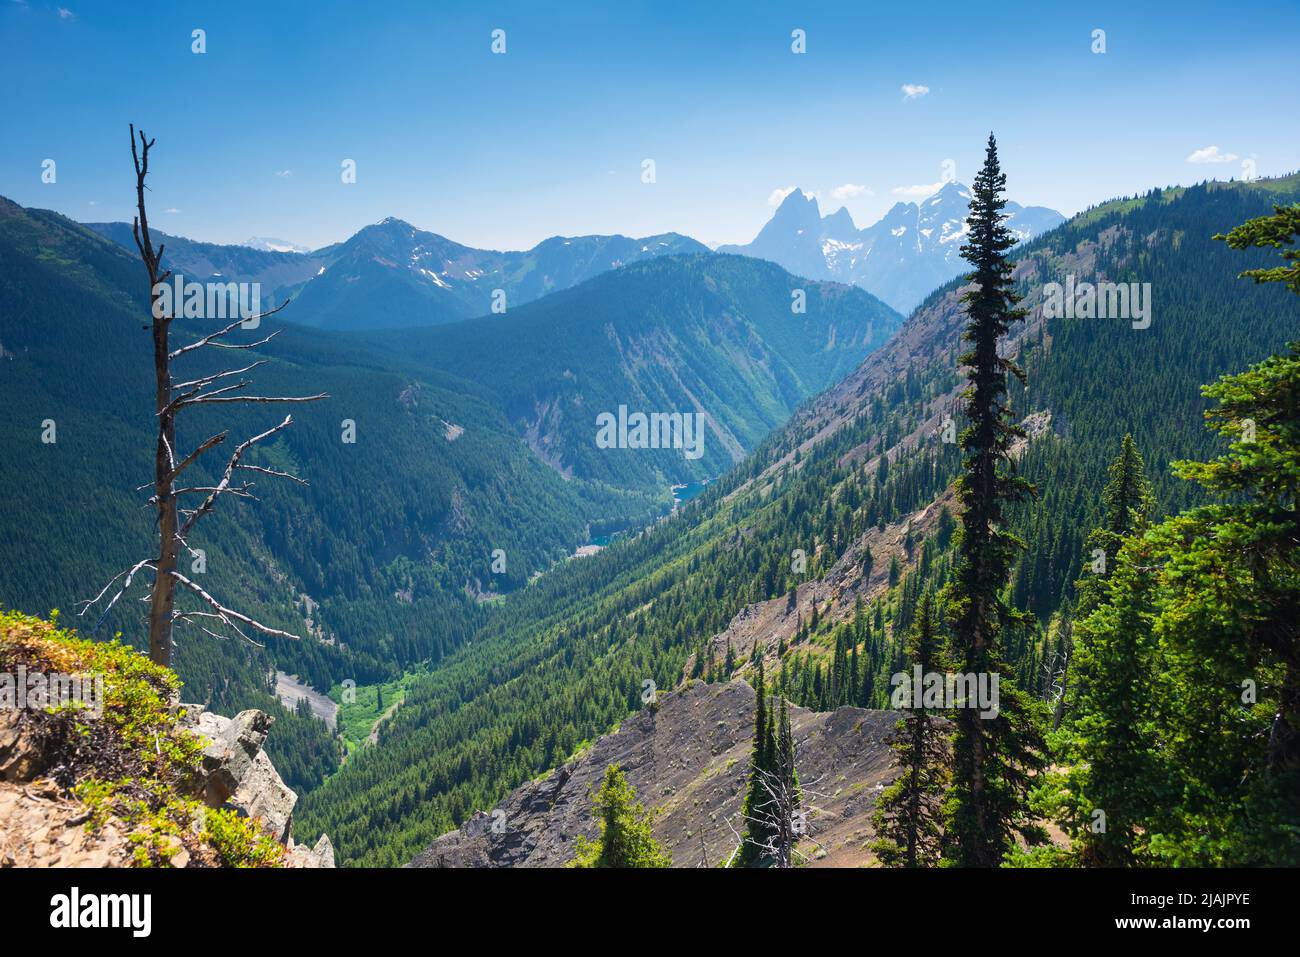 Looking towards Hozomeen Mountain from the Skyline Trail in E.C. Manning Provincial Park, British Columbia, Canada Stock Photo